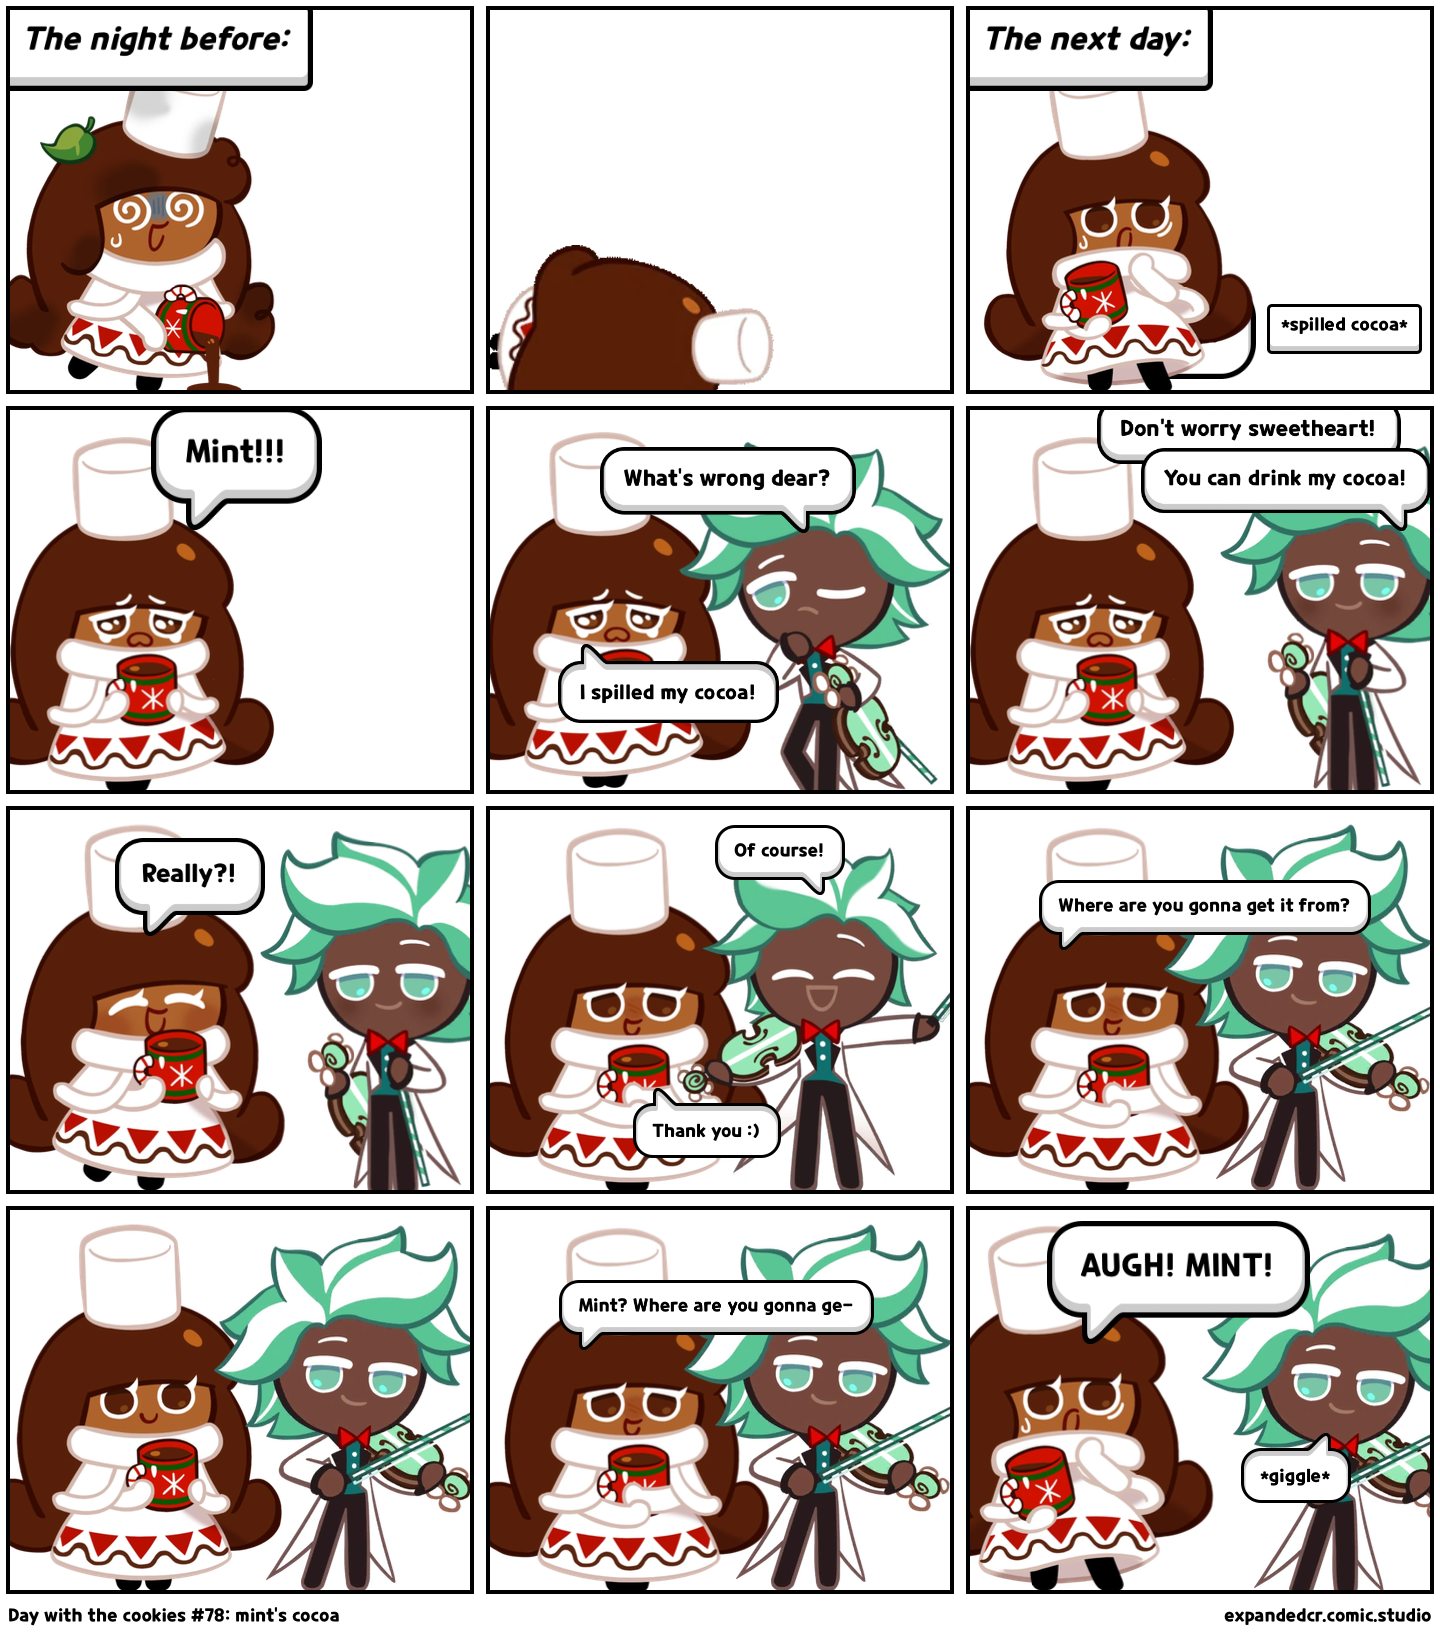 Day with the cookies #78: mint’s cocoa